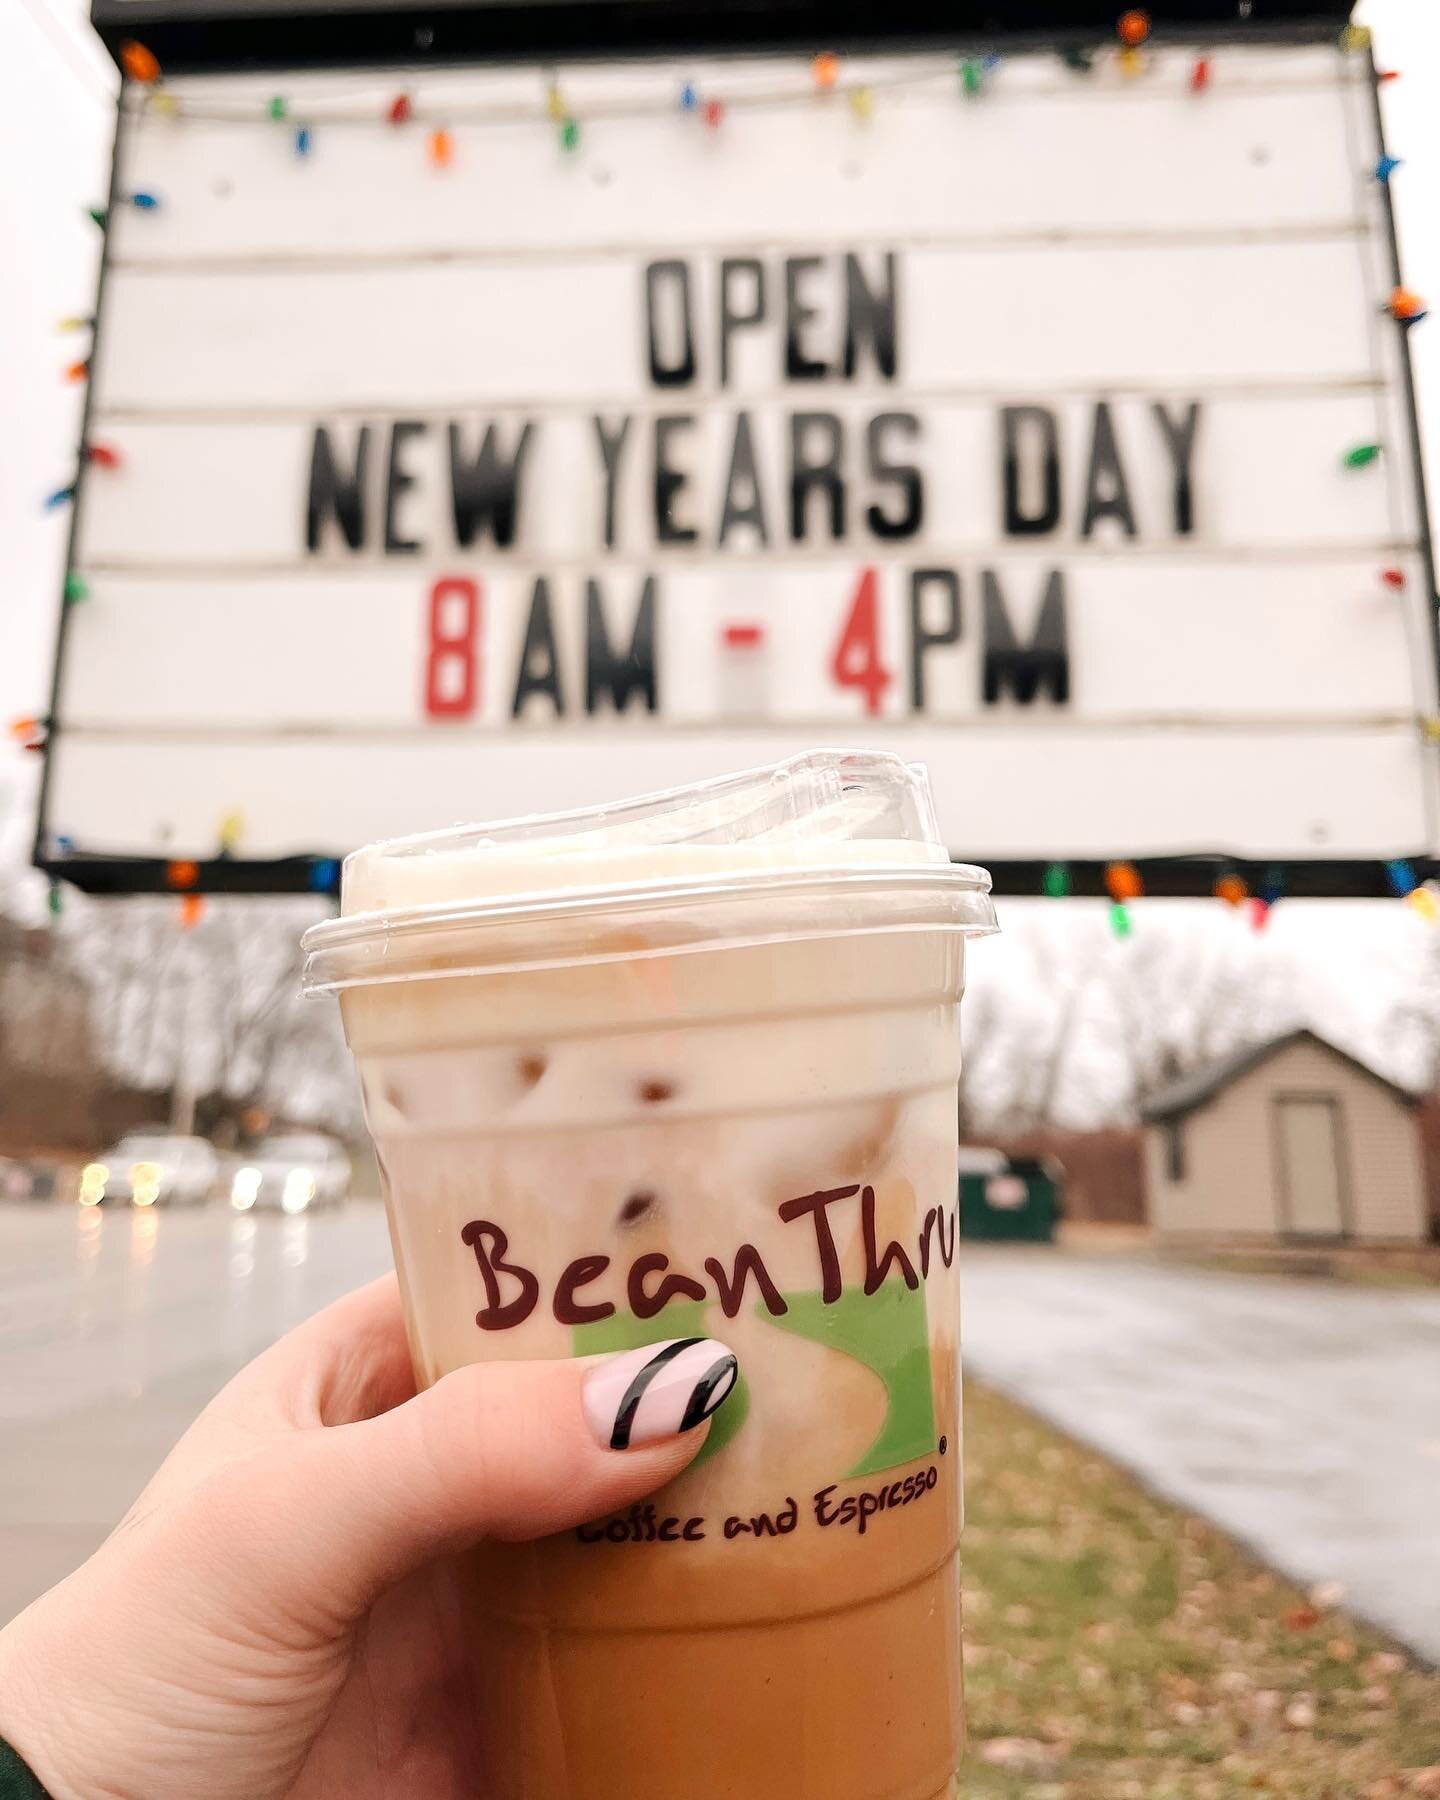 Come visit us this weekend and ring in the New Year with a coffee from your favorite baristas! ☕️🎊

Open today until 5 p. m. and open New Year&rsquo;s day 8 a.m.-4 p.m.!